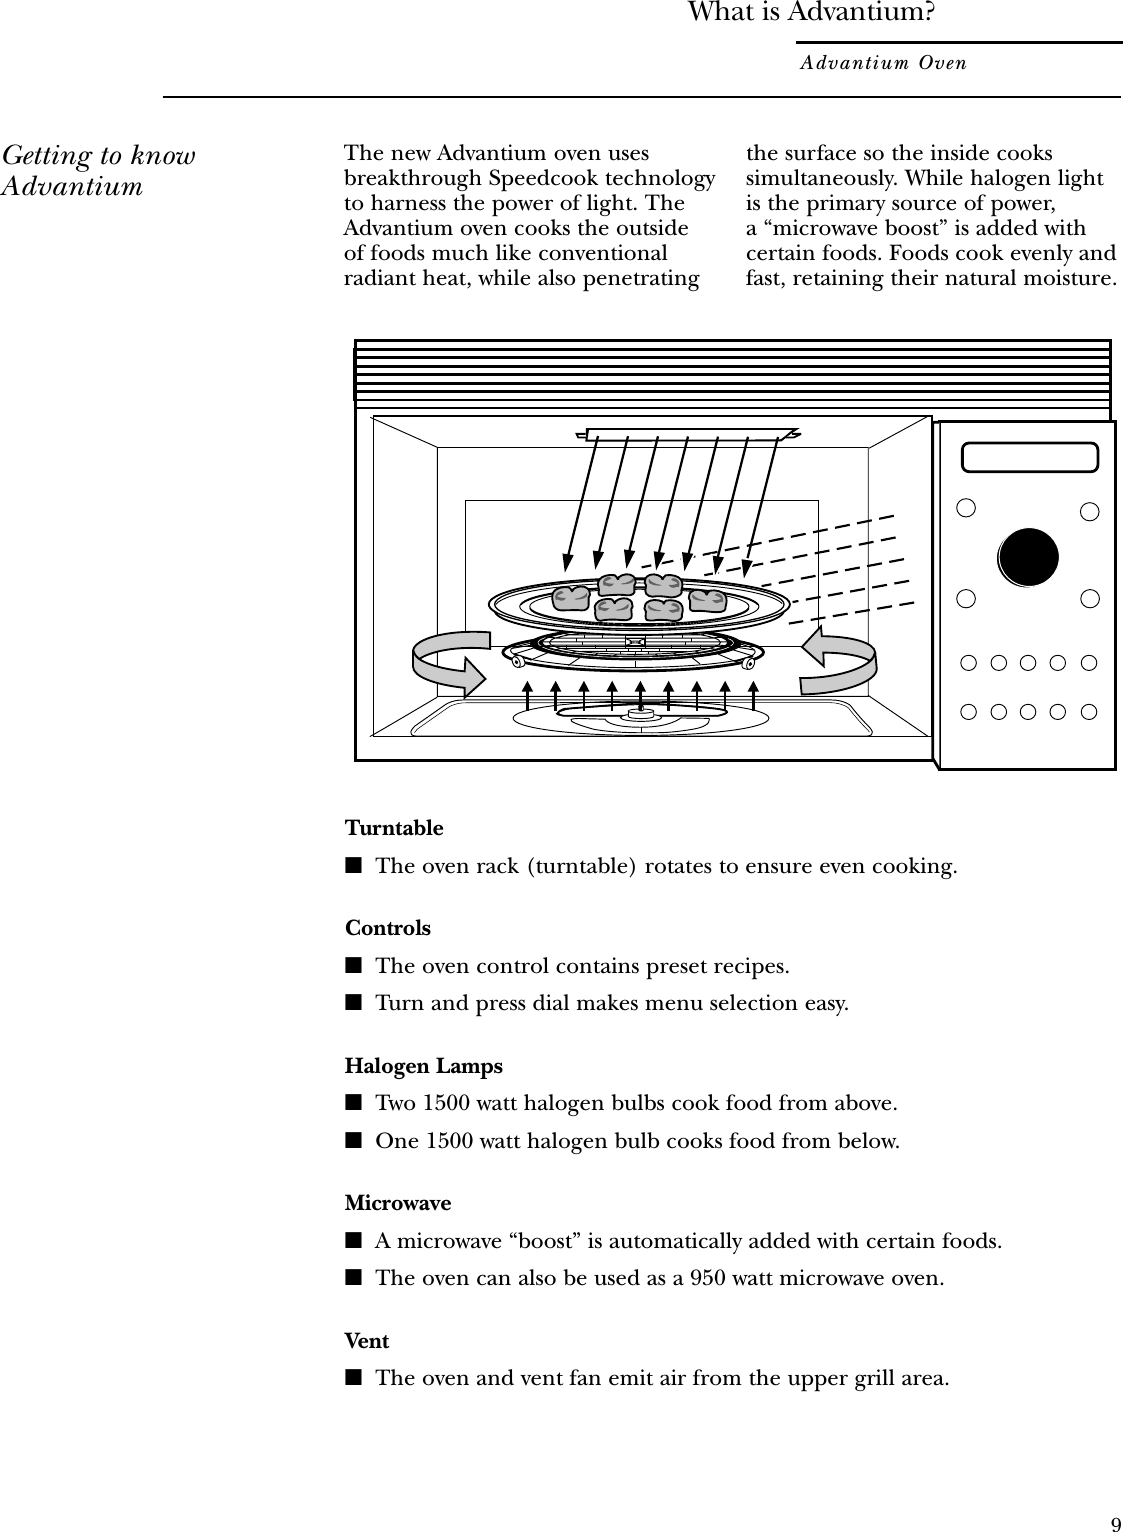 What is Advantium?Advantium OvenThe new Advantium oven usesbreakthrough Speedcook technologyto harness the power of light. TheAdvantium oven cooks the outside of foods much like conventionalradiant heat, while also penetratingthe surface so the inside cookssimultaneously. While halogen lightis the primary source of power, a “microwave boost” is added withcertain foods. Foods cook evenly andfast, retaining their natural moisture.Turntable■The oven rack (turntable) rotates to ensure even cooking.Controls■The oven control contains preset recipes.■Turn and press dial makes menu selection easy.Halogen Lamps■Two 1500 watt halogen bulbs cook food from above.■One 1500 watt halogen bulb cooks food from below.Microwave■A microwave “boost” is automatically added with certain foods.■The oven can also be used as a 950 watt microwave oven.Vent■The oven and vent fan emit air from the upper grill area.Getting to knowAdvantium9